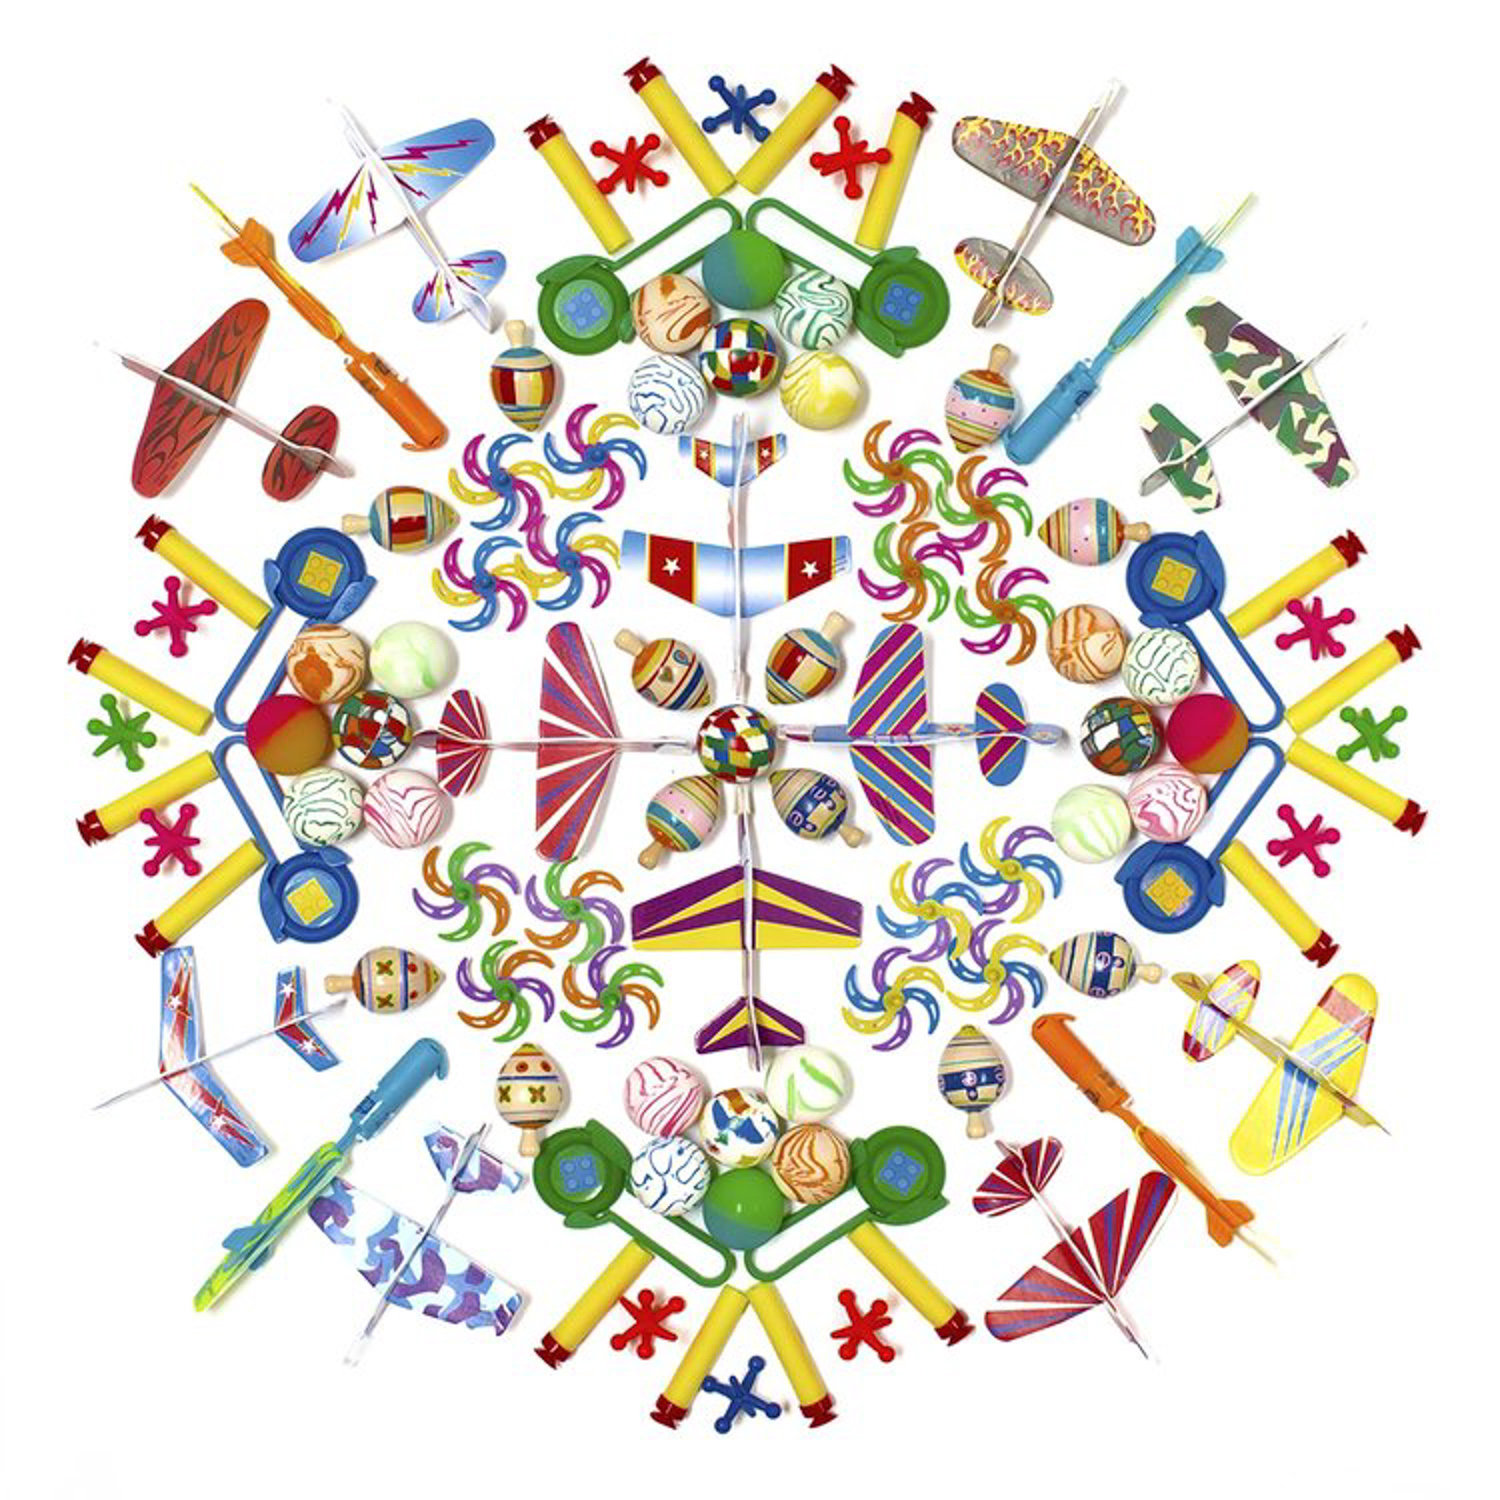 A selection of Paula Brett’s mandalas made out of various items are on display in the group exhibition ‘Picture This’ at Elisa Contemporary Art through Jan. 15.